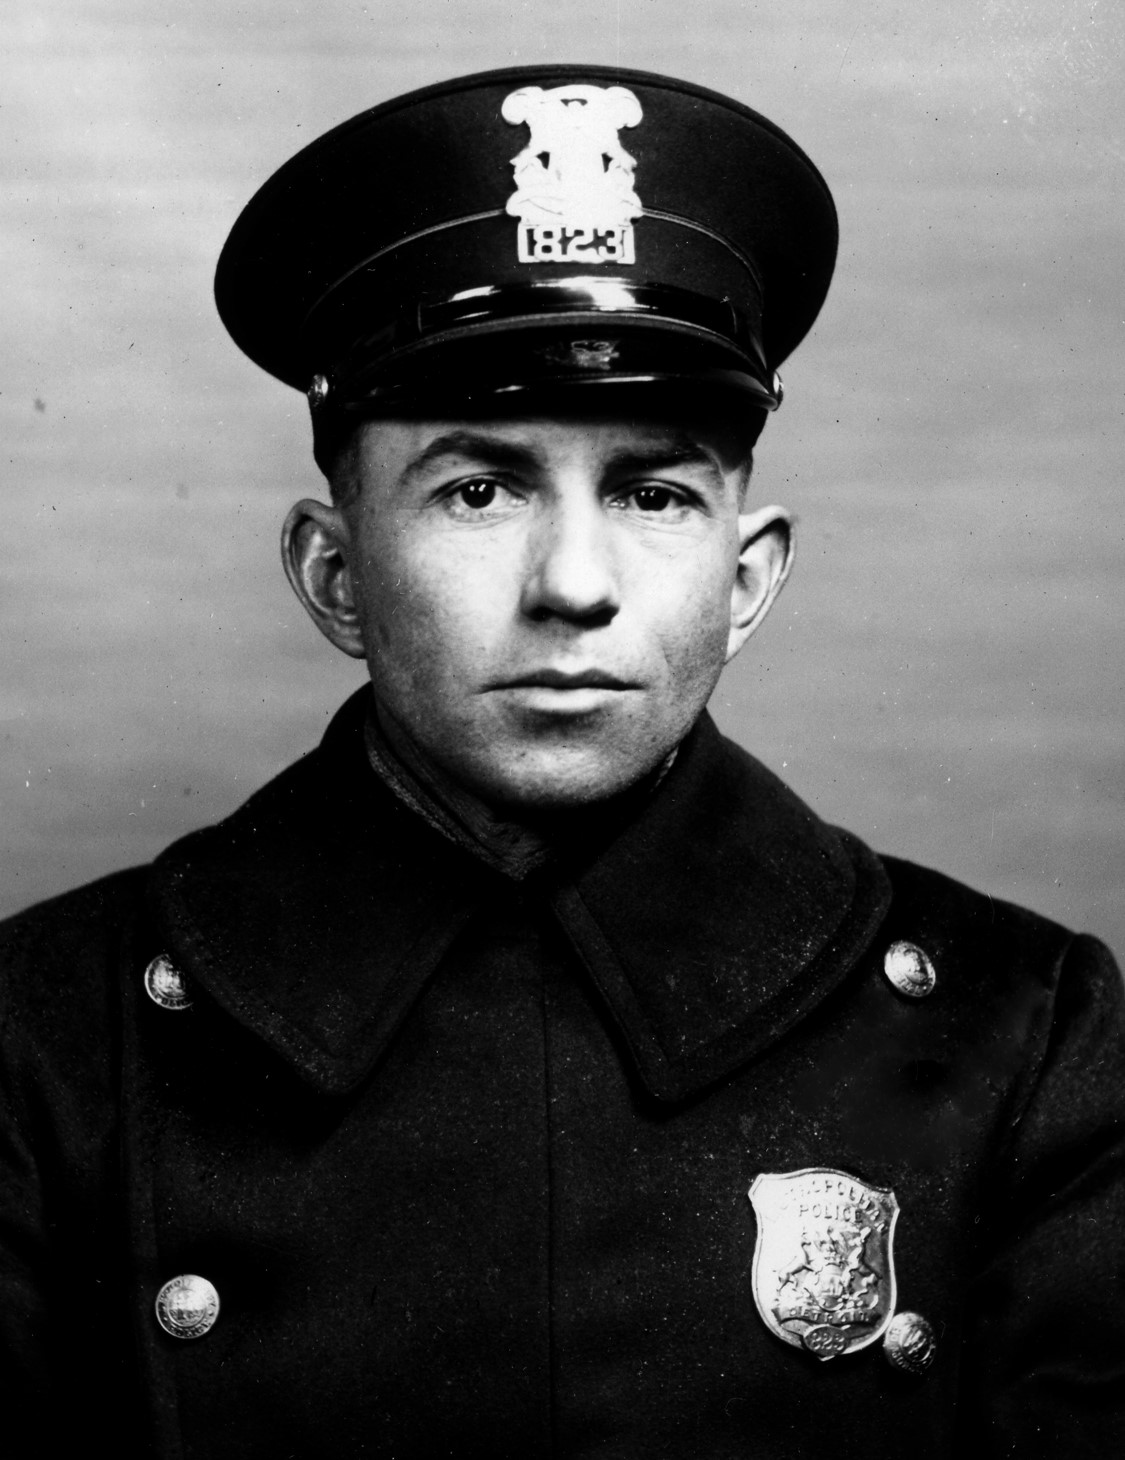 Police Officer Elmer M. Powers | Detroit Police Department, Michigan